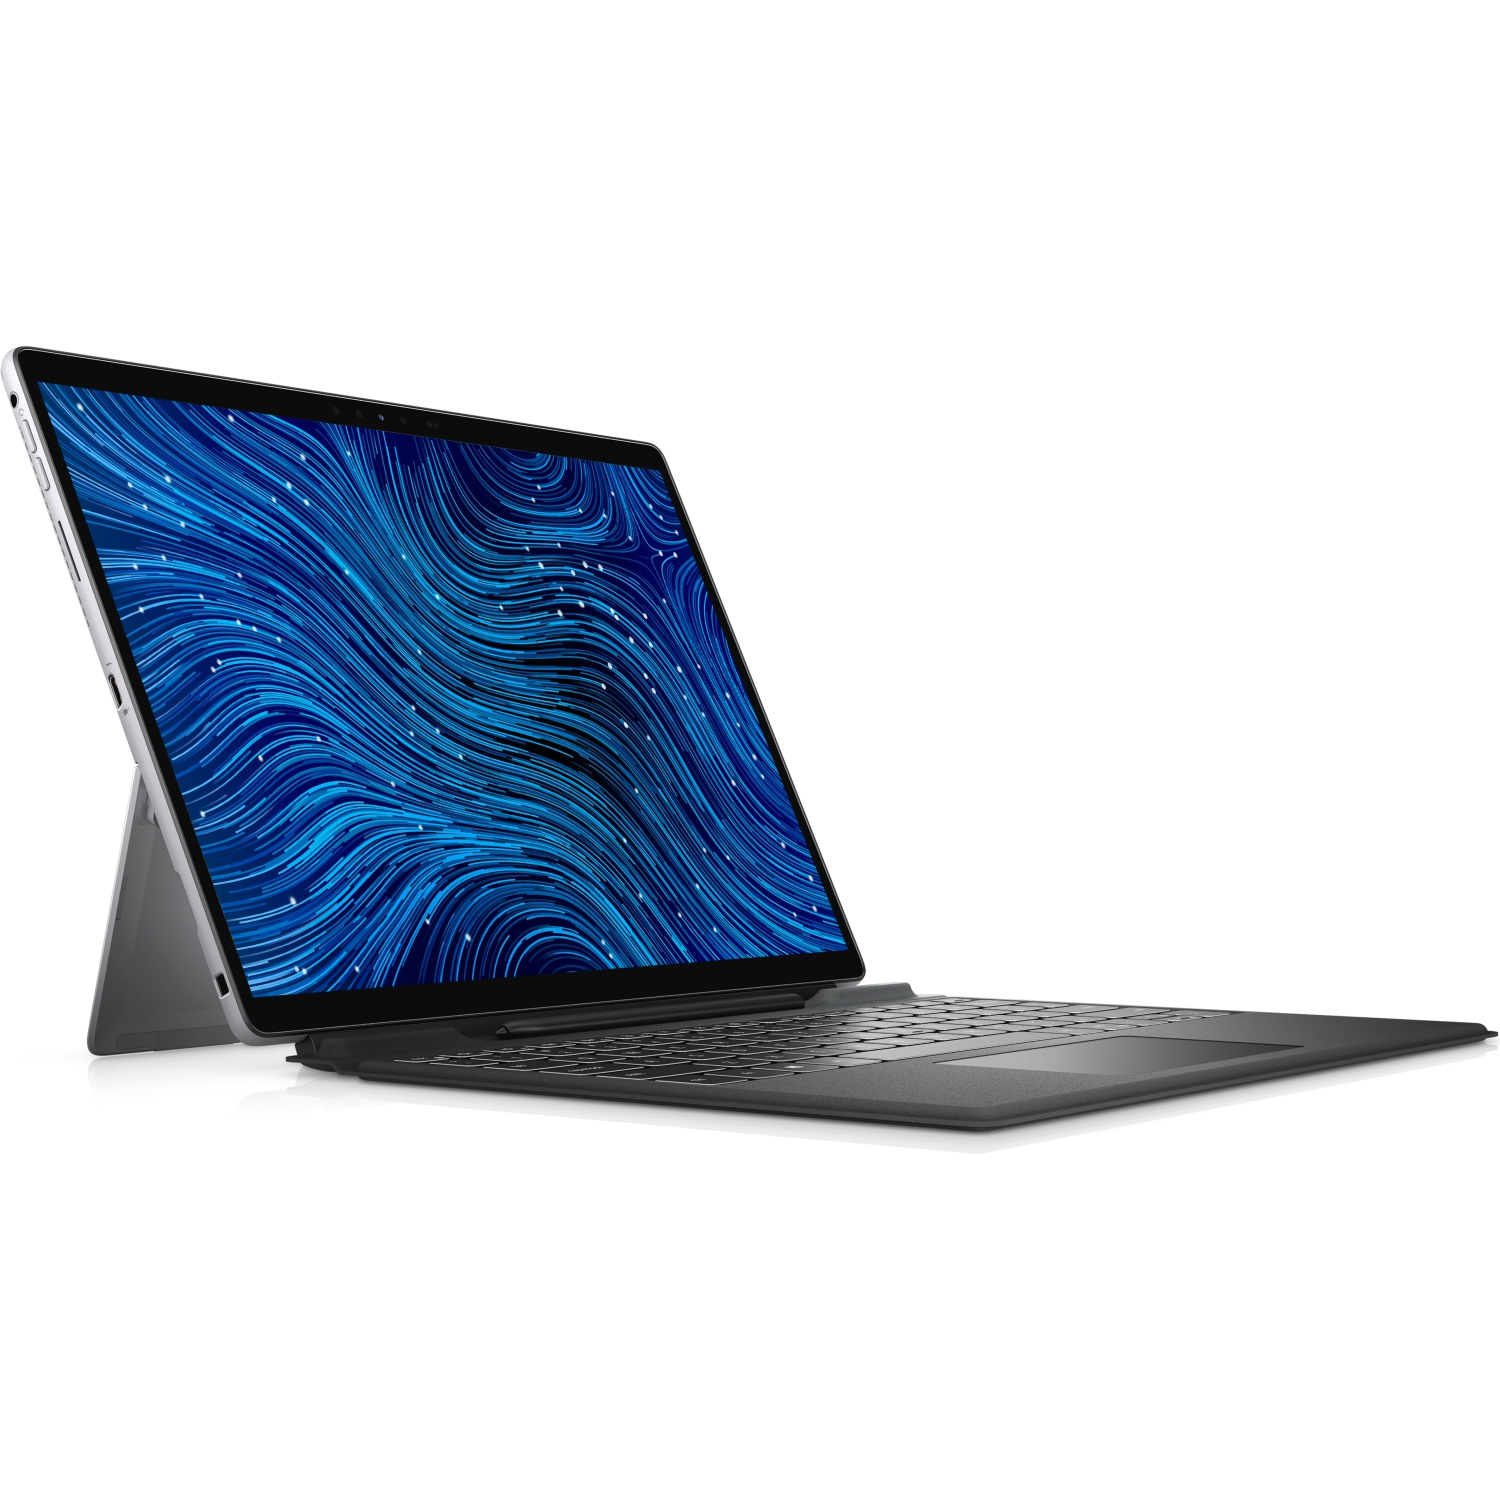 Refurbished (Excellent) - Dell Latitude 7000 7320 Detachable 13 2-in-1 (2021), 13" FHD+ Touch, Core i7, 1TB SSD, 16GB RAM, 4 Cores @ 4.6 GHz, 11th Gen CPU Certified